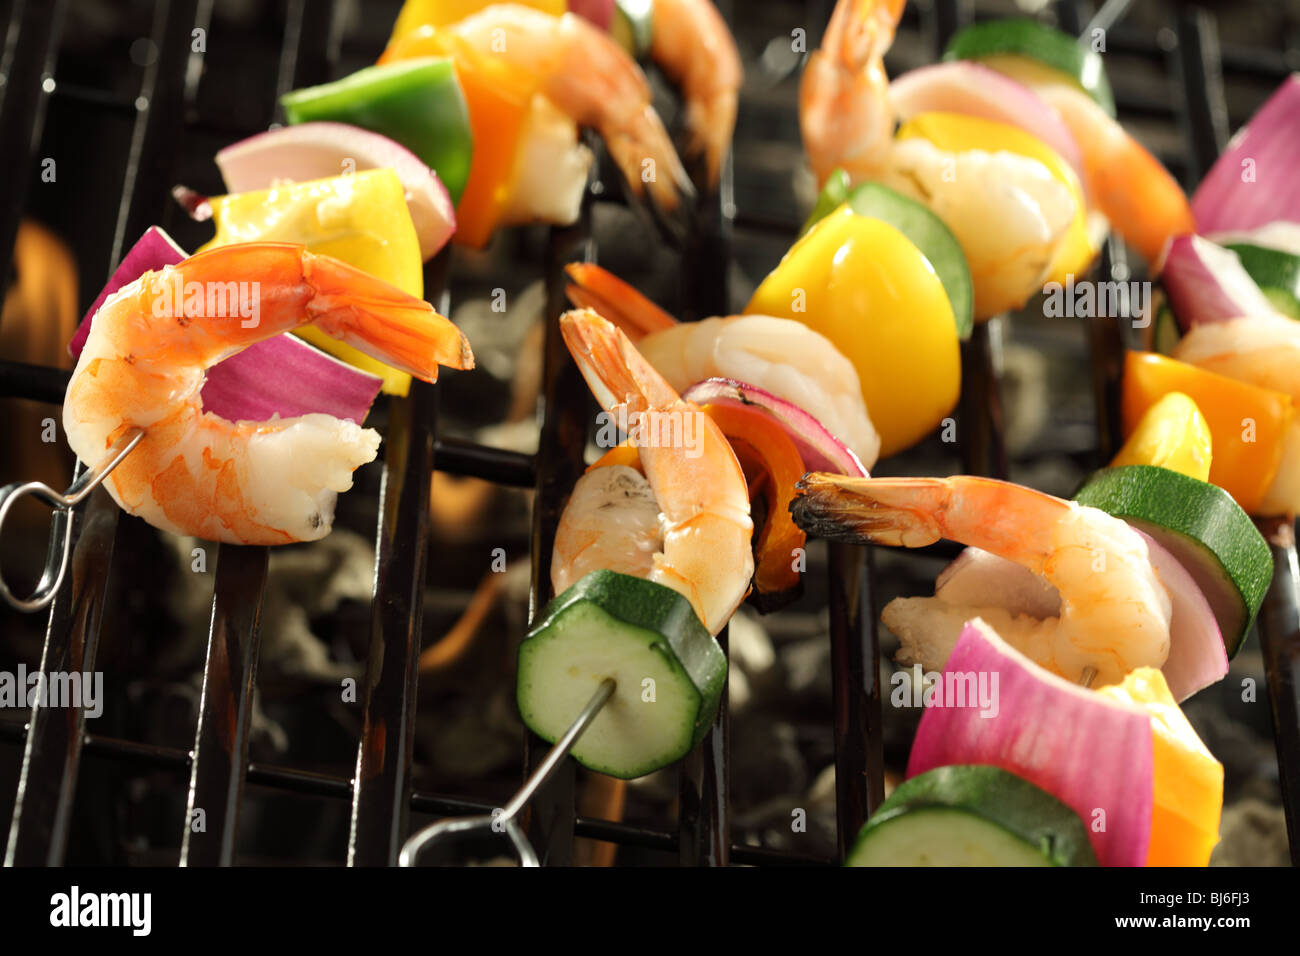 Shrimp and vegetable skewers cooking on grill Stock Photo